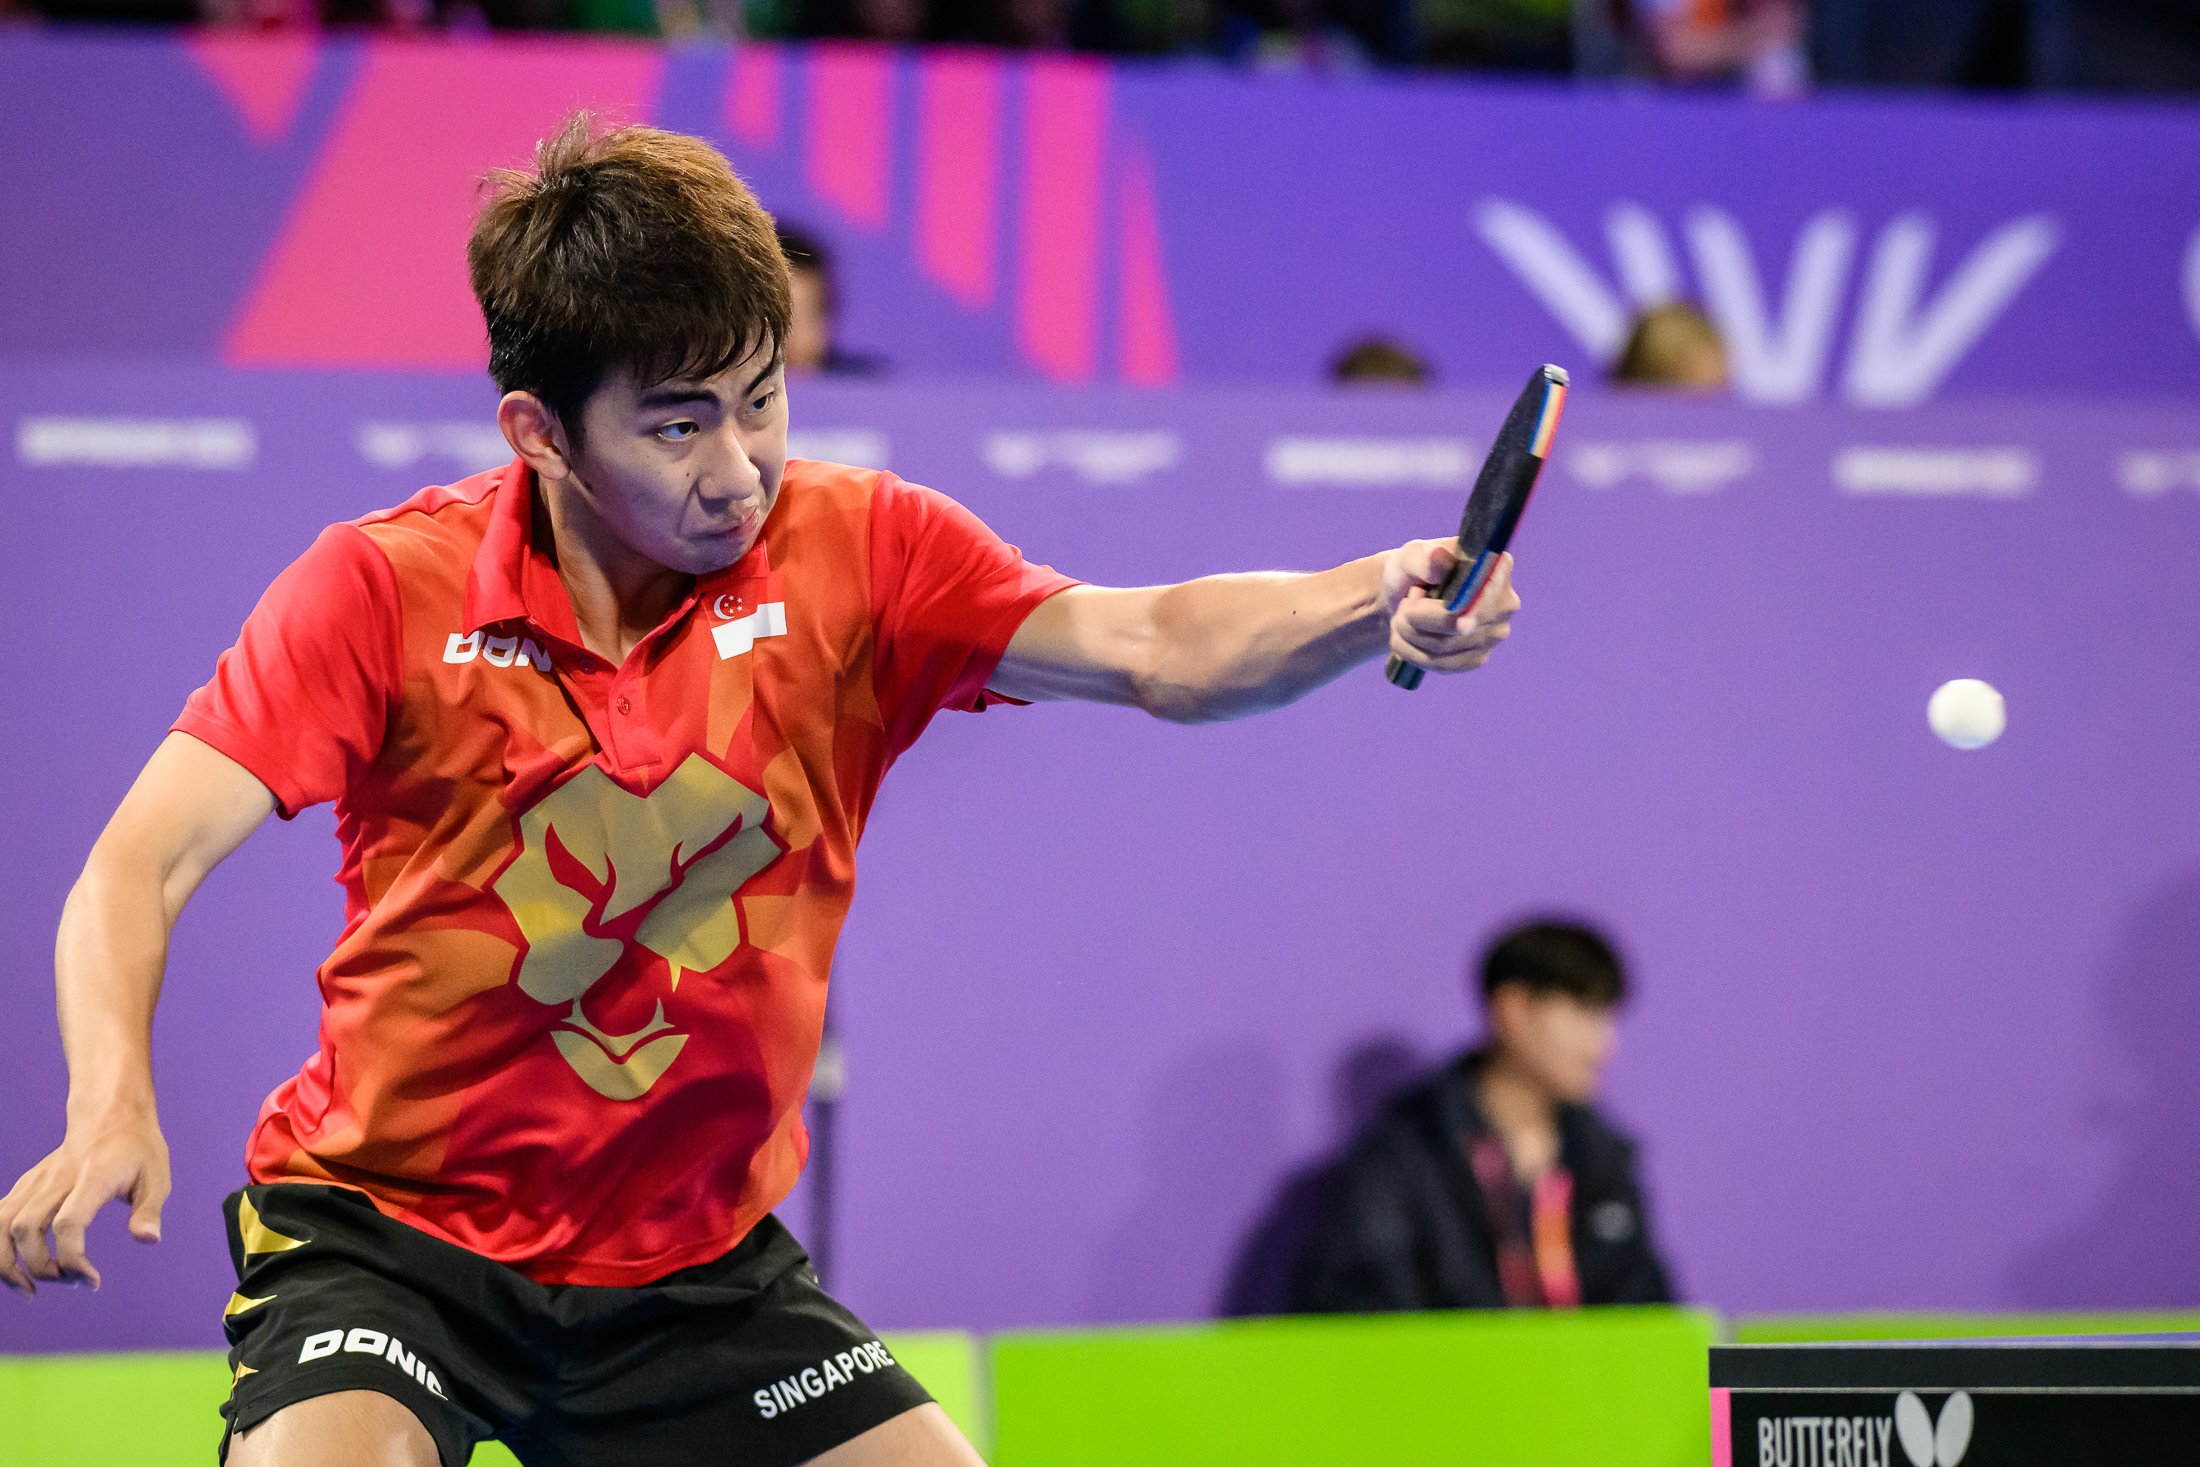 20220731_-_Table Tennis Photo by Andy Chua_018